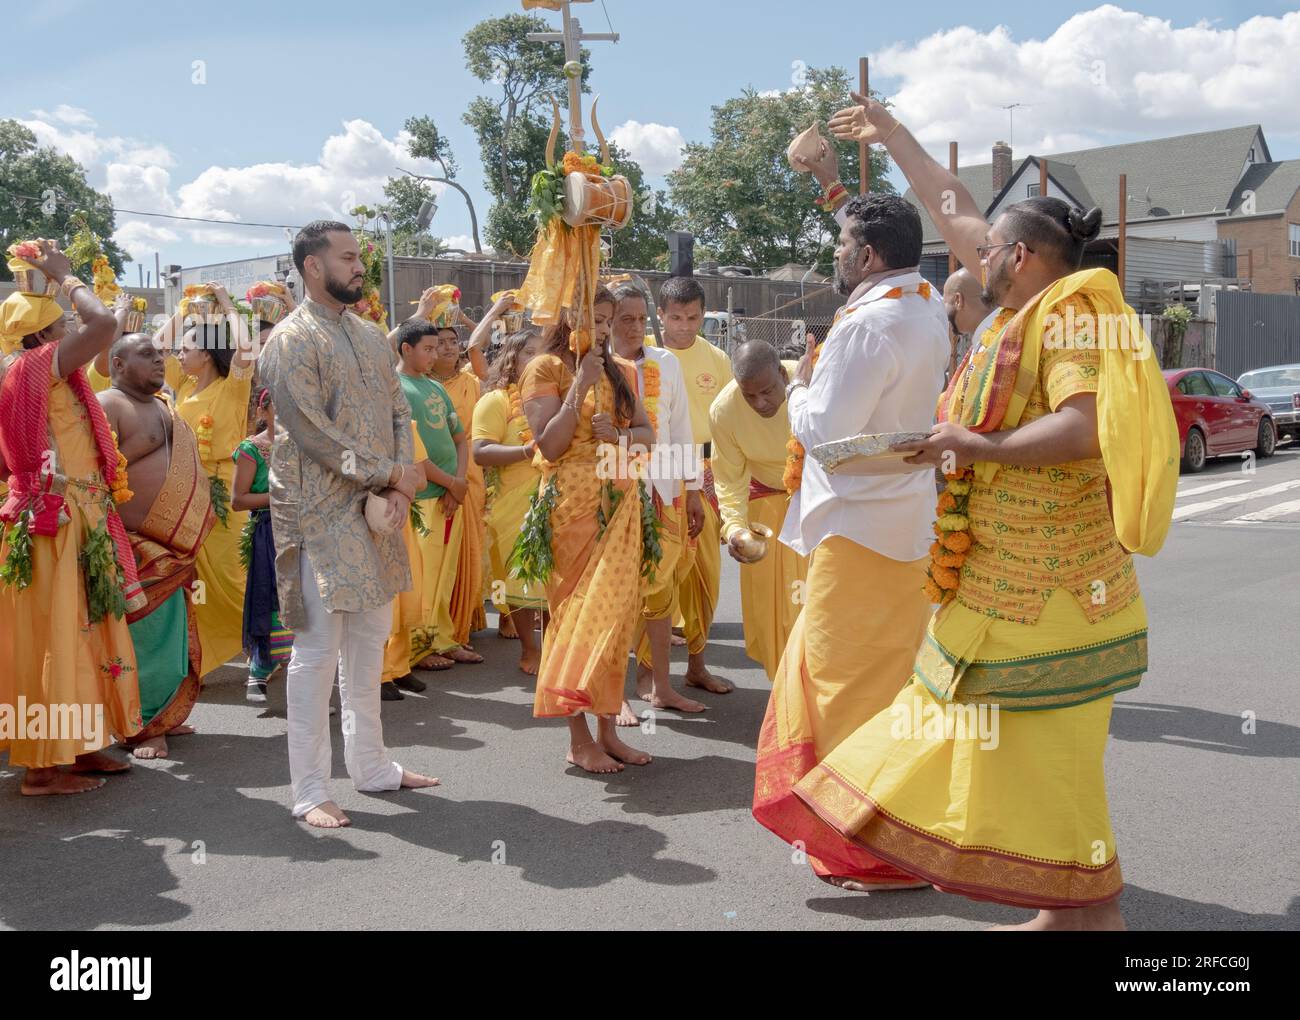 During the parade from Shri Shaktii Mariammaa temple to the fire walking event a pandit smashes a coconut into the ground. In Richmond Hill Queens NY Stock Photo